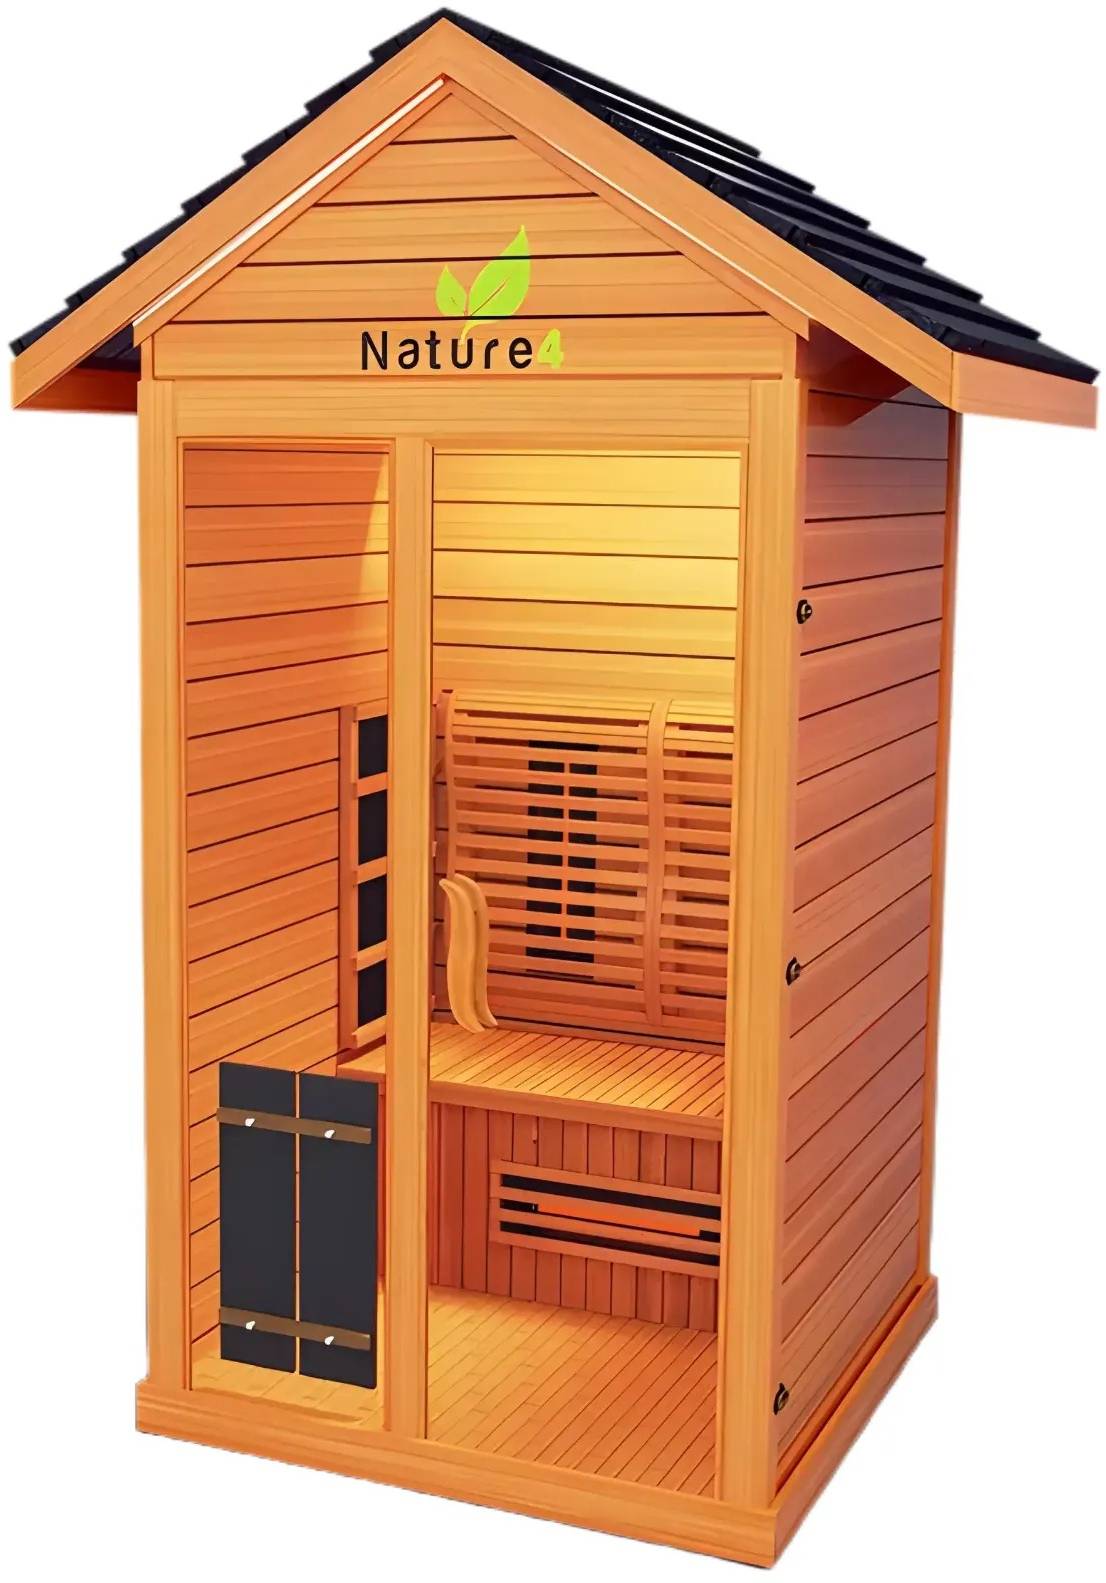 ZiahCare's Medical Saunas 1-2 Person Outdoor Full Spectrum Infrared Sauna Nature 4 Mockup Image 3